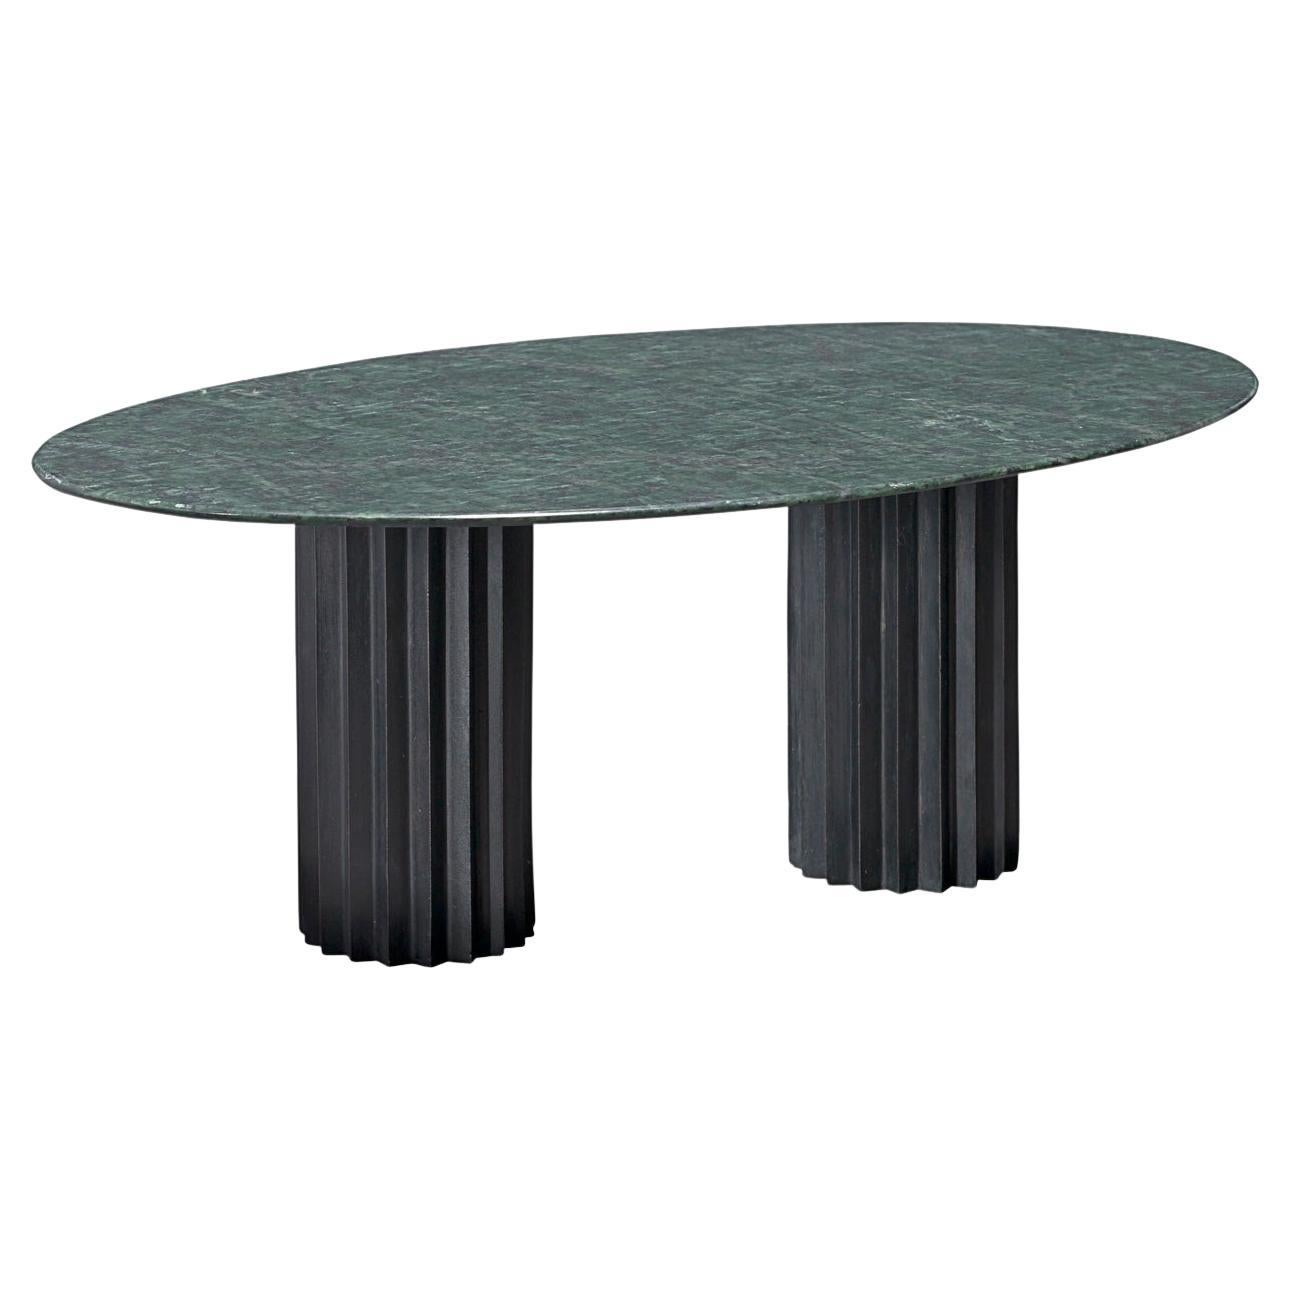 Doris Green Serpentino Marble Oval Dining Table by Fred and Juul For Sale